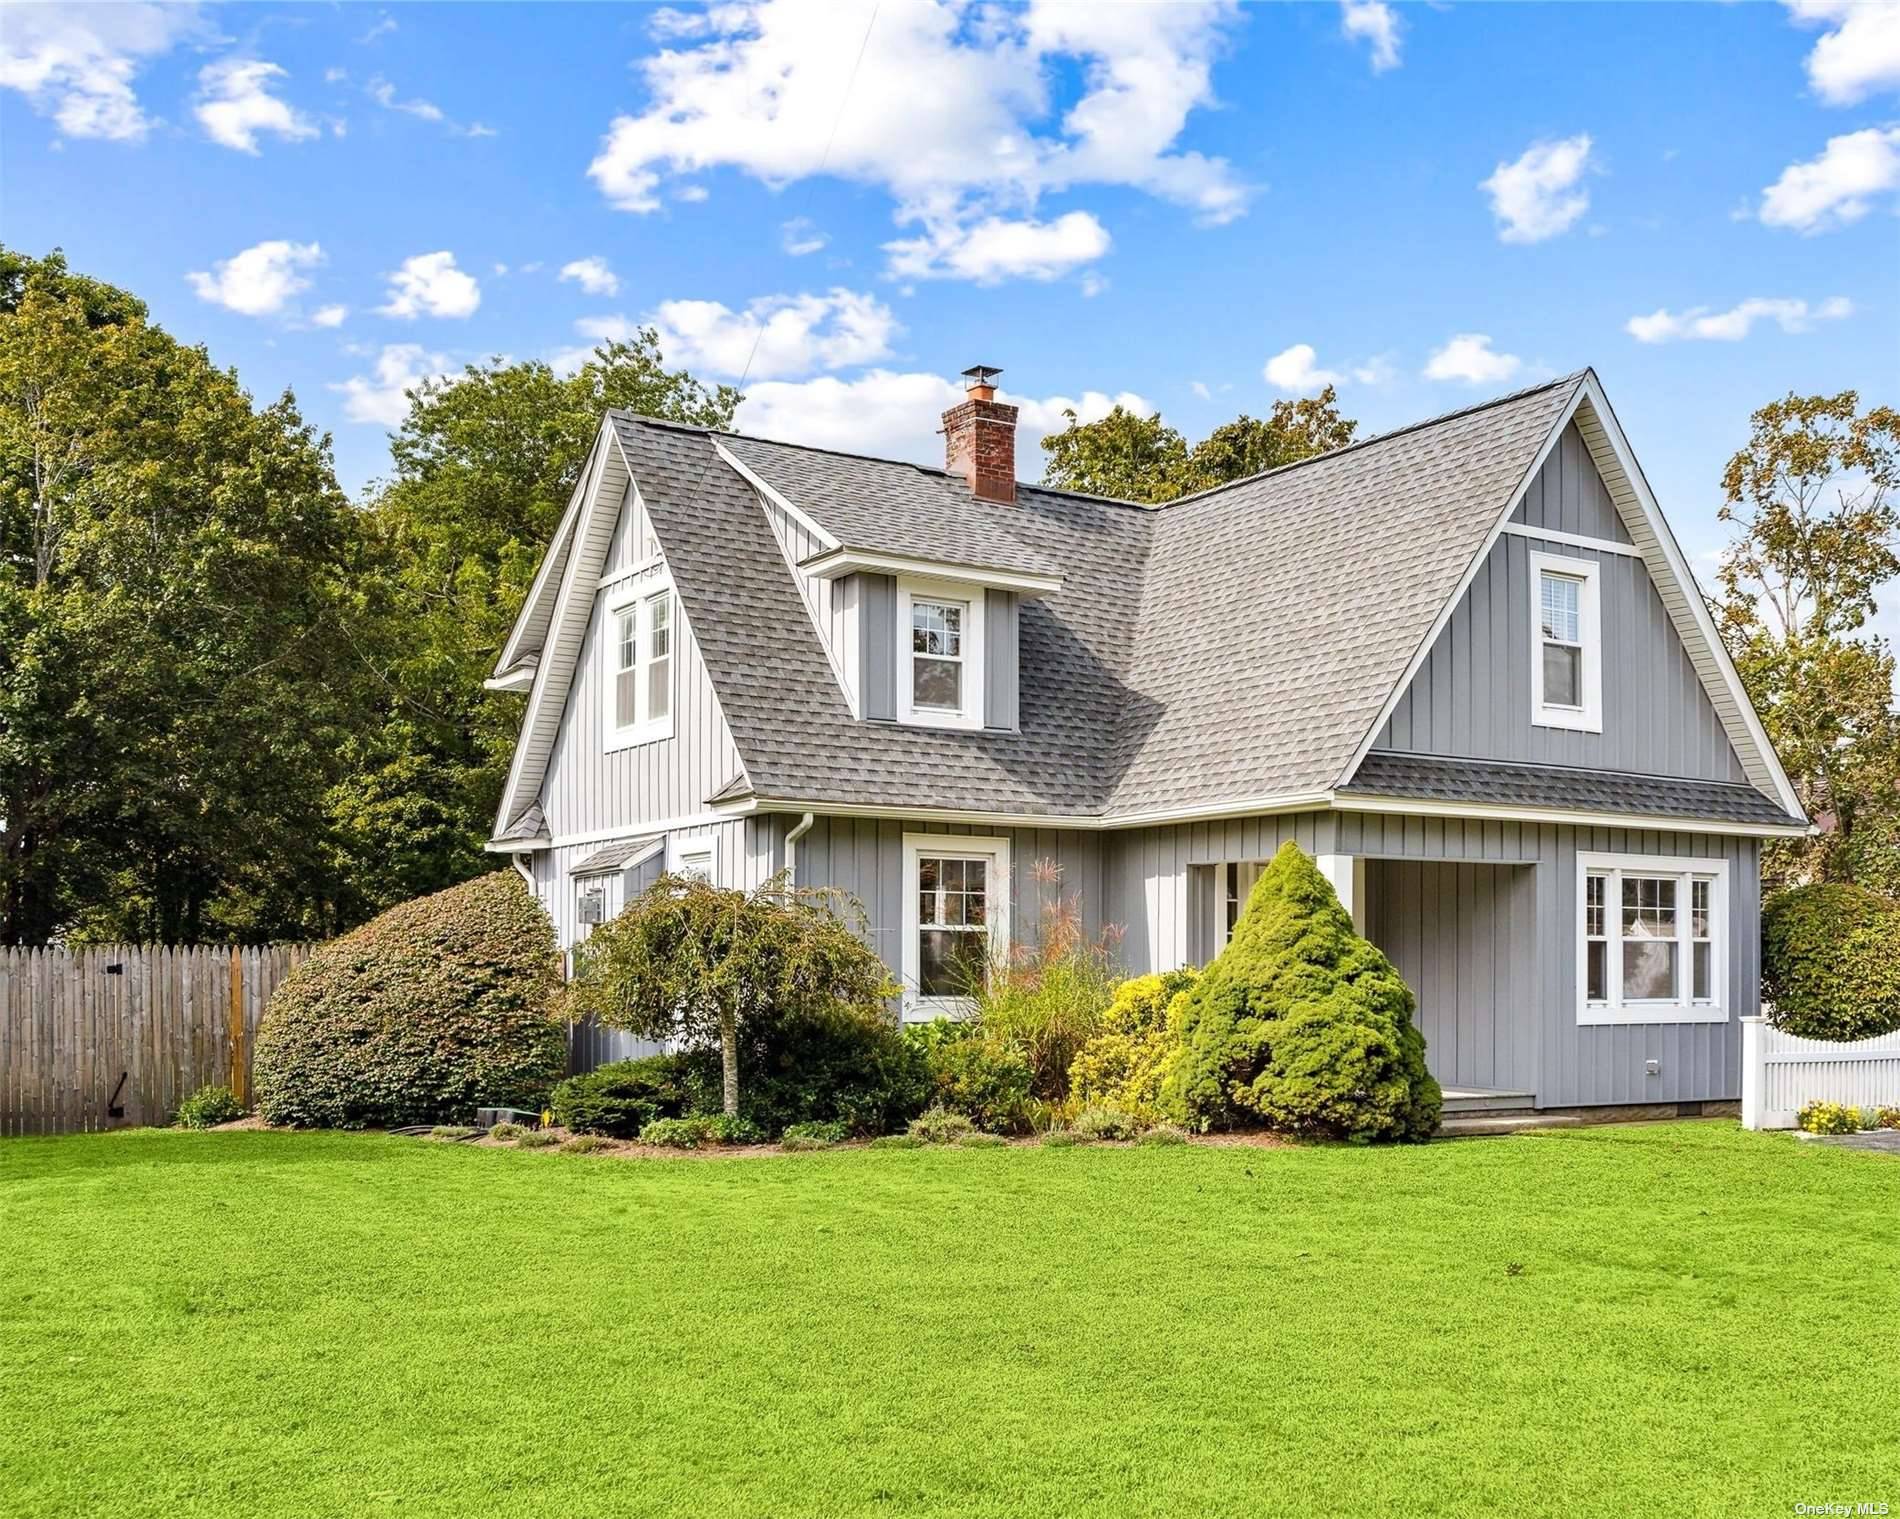 5 North Bay in Eastport a hip, charming cottage with Southampton town beach rights, less than a mile from Moriches Bay, across the street from Ocean Fog flower farm, around ...